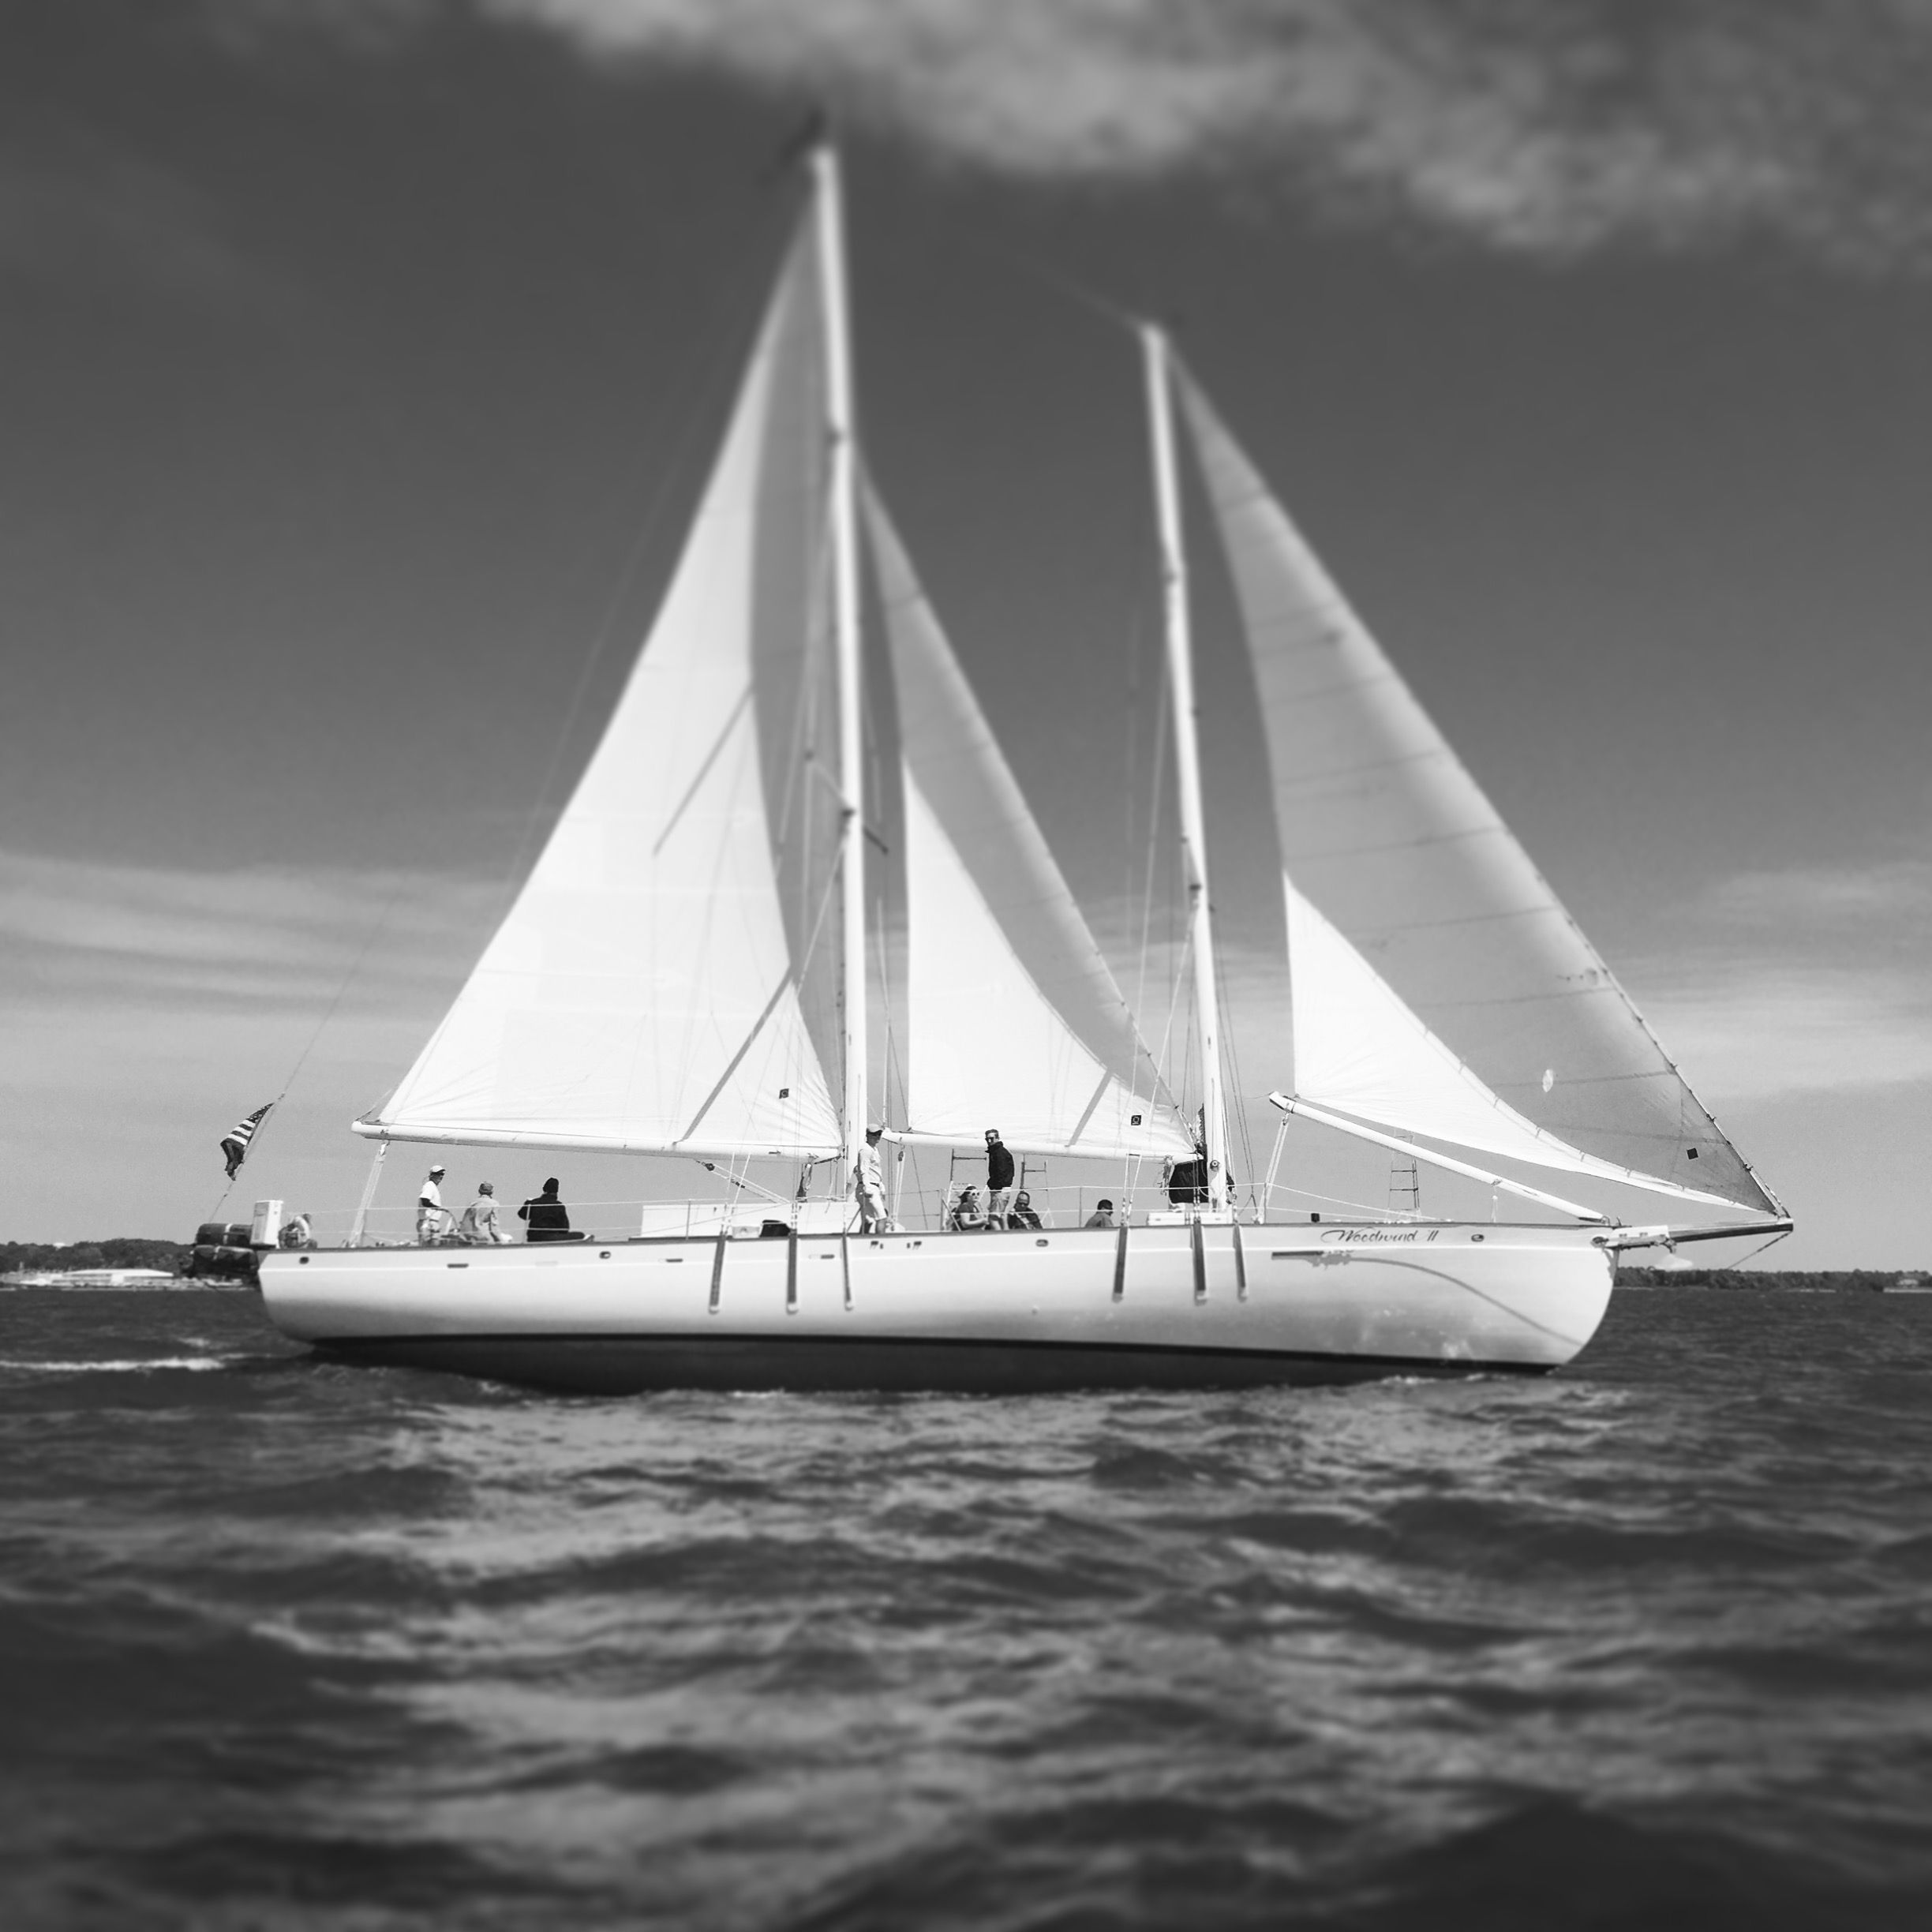 Schooner in a black and white photograph under full sail